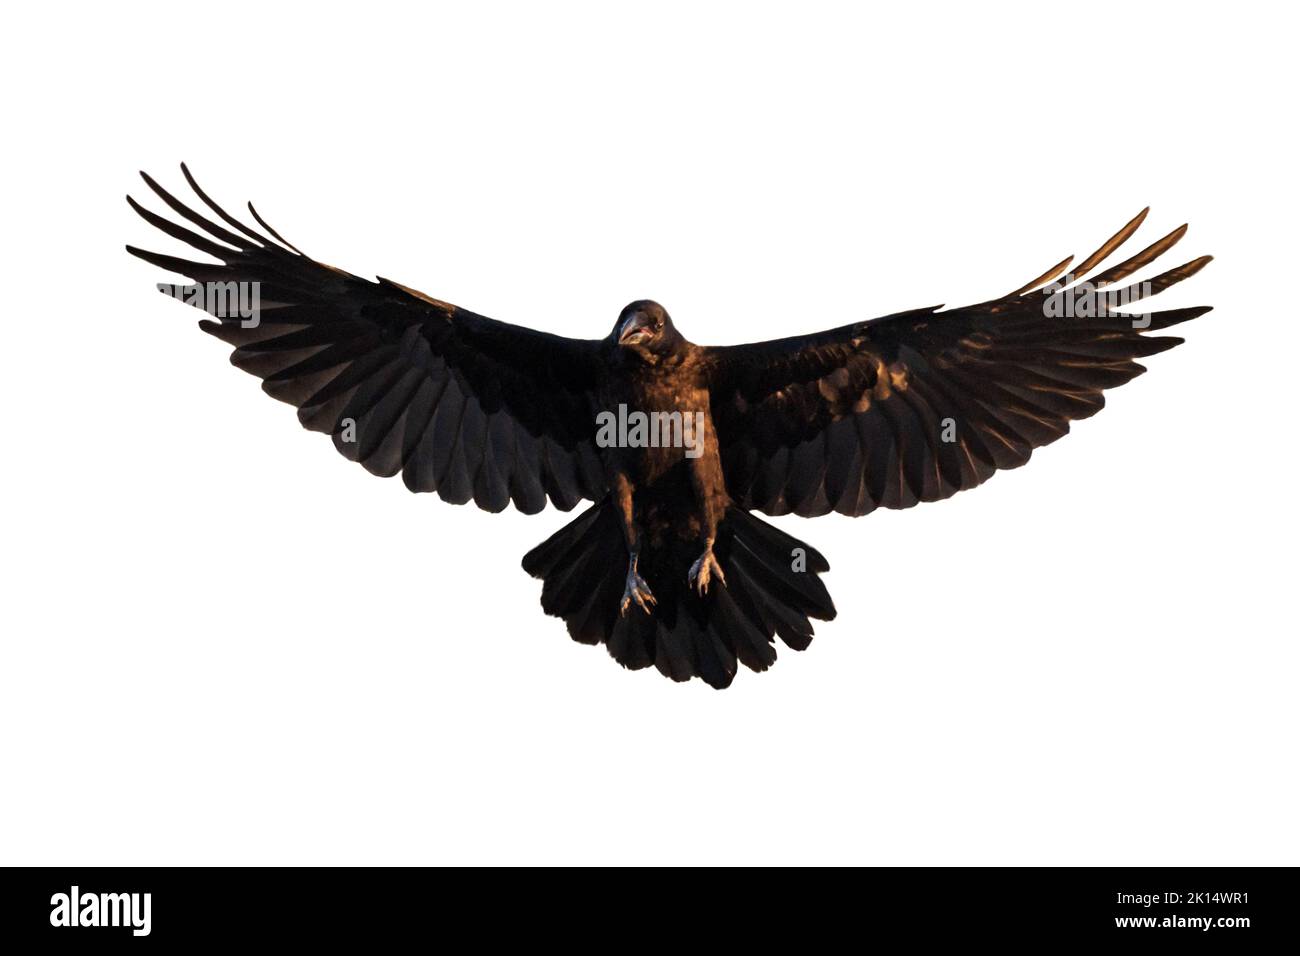 black raven spread wings isolated on white background Stock Photo